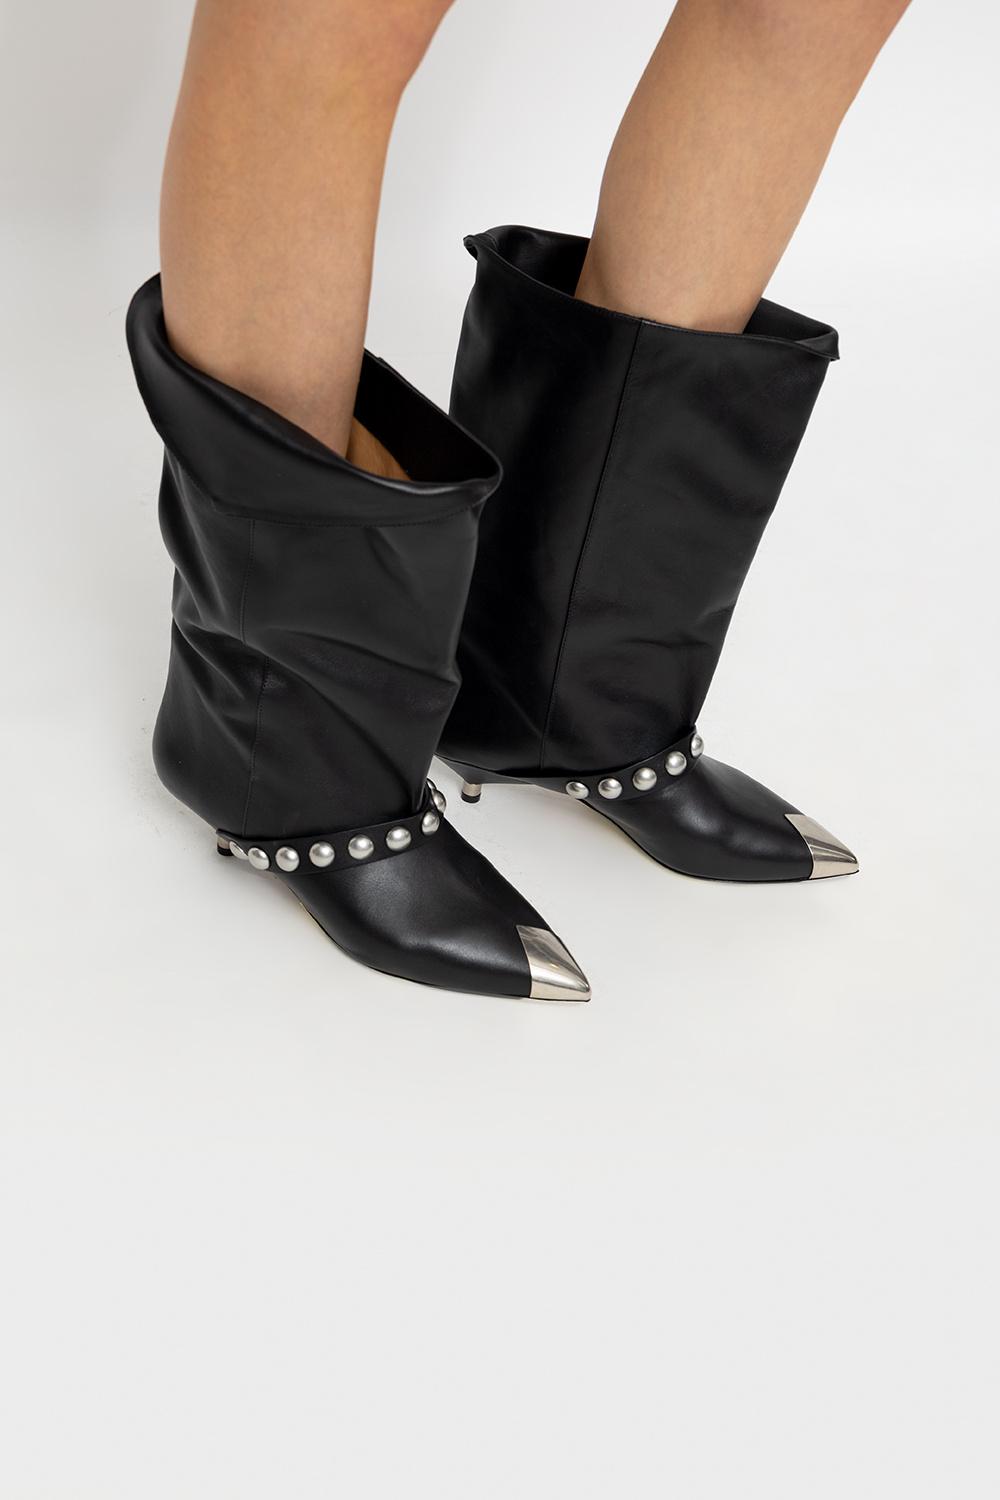 Isabel Marant Donatee Low Heels Ankle Boots In Black Leather